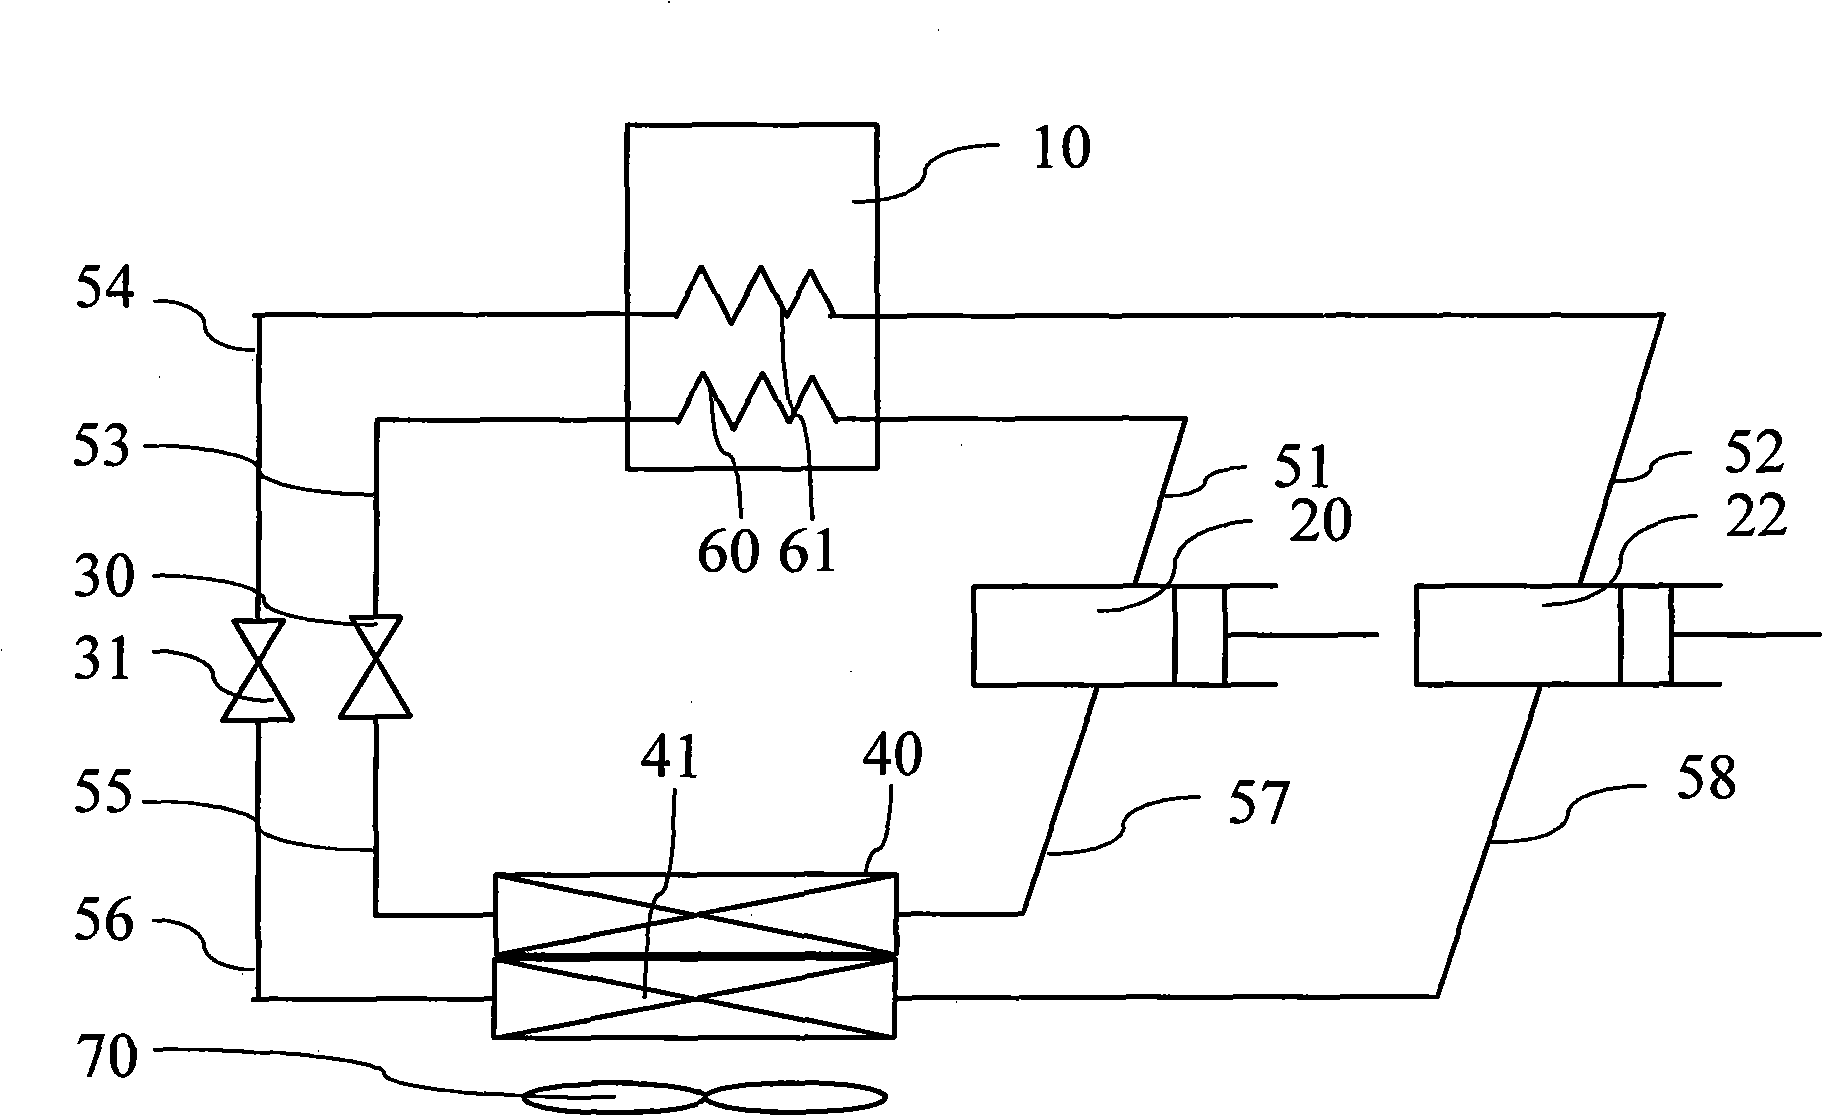 Parallelly-arranged double-circulating heat pump water heater